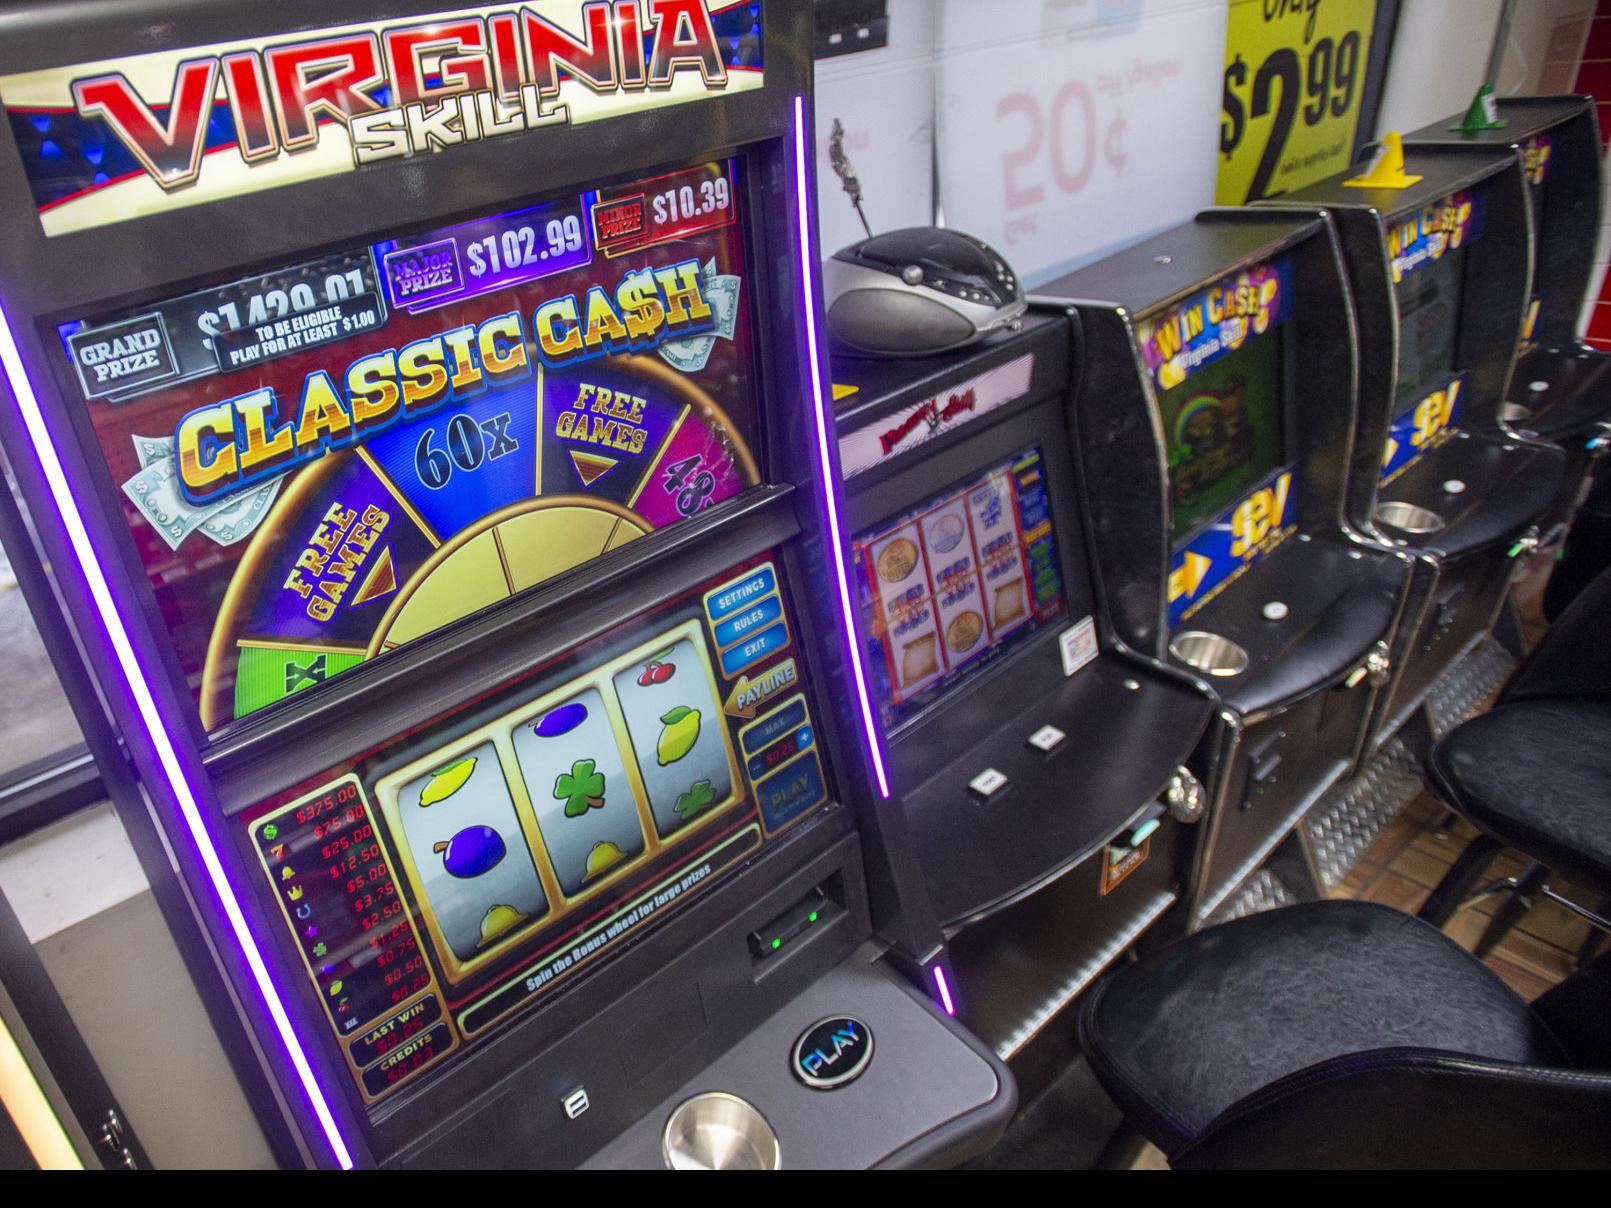 Reading slot machine pay tables